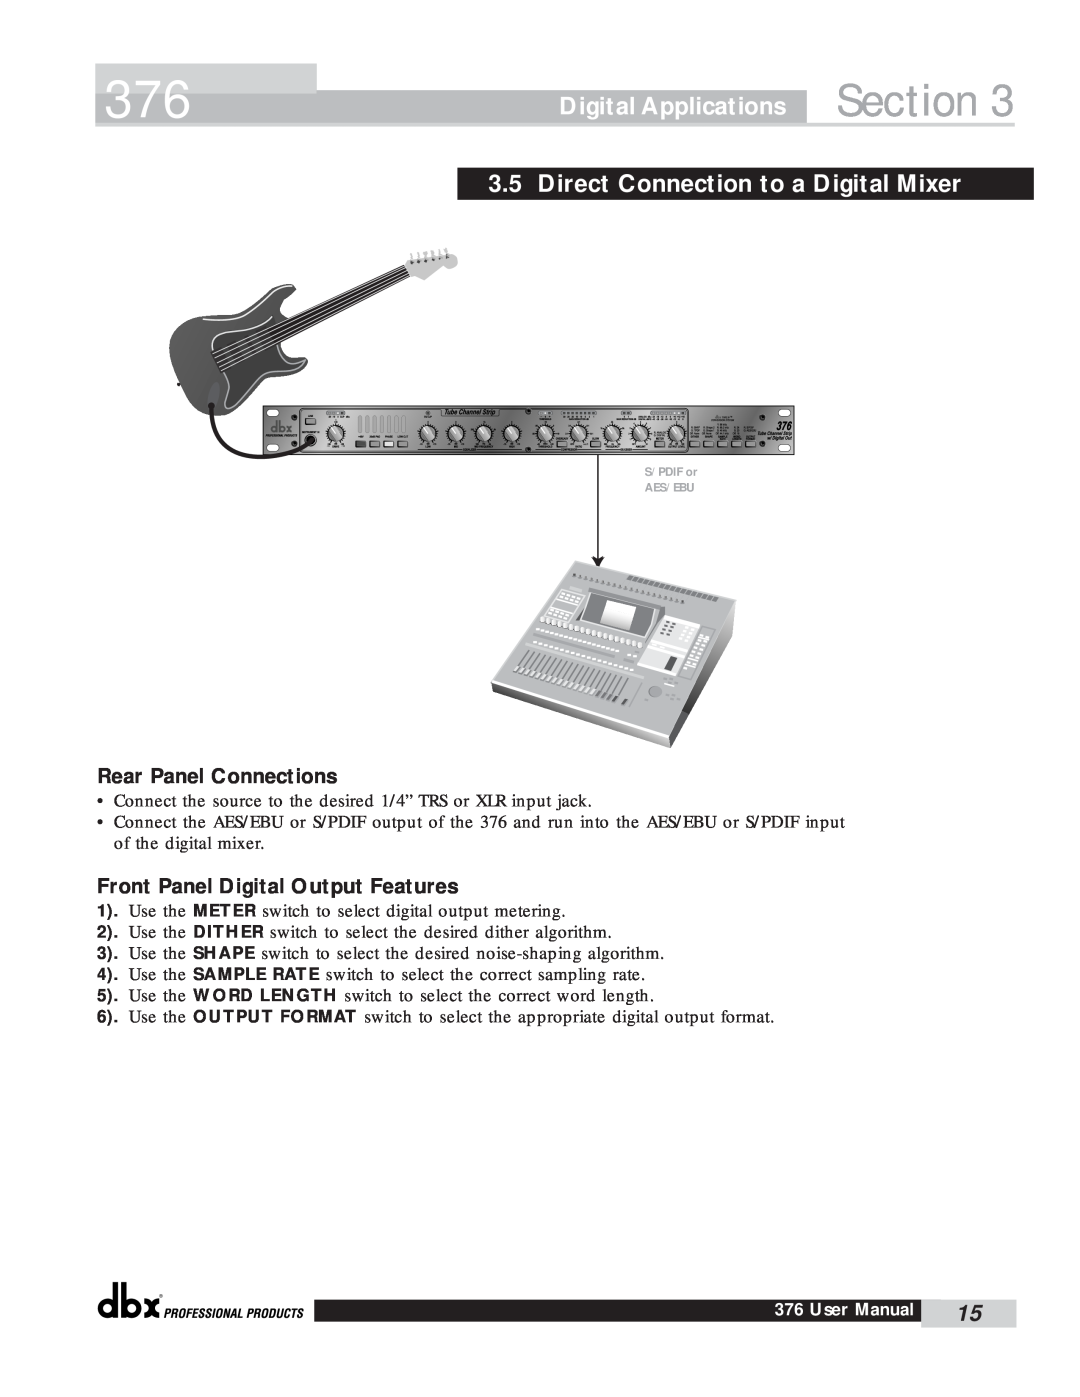 dbx Pro 376 user manual Section, Direct Connection to a Digital Mixer, Digital Applications, Rear Panel Connections 